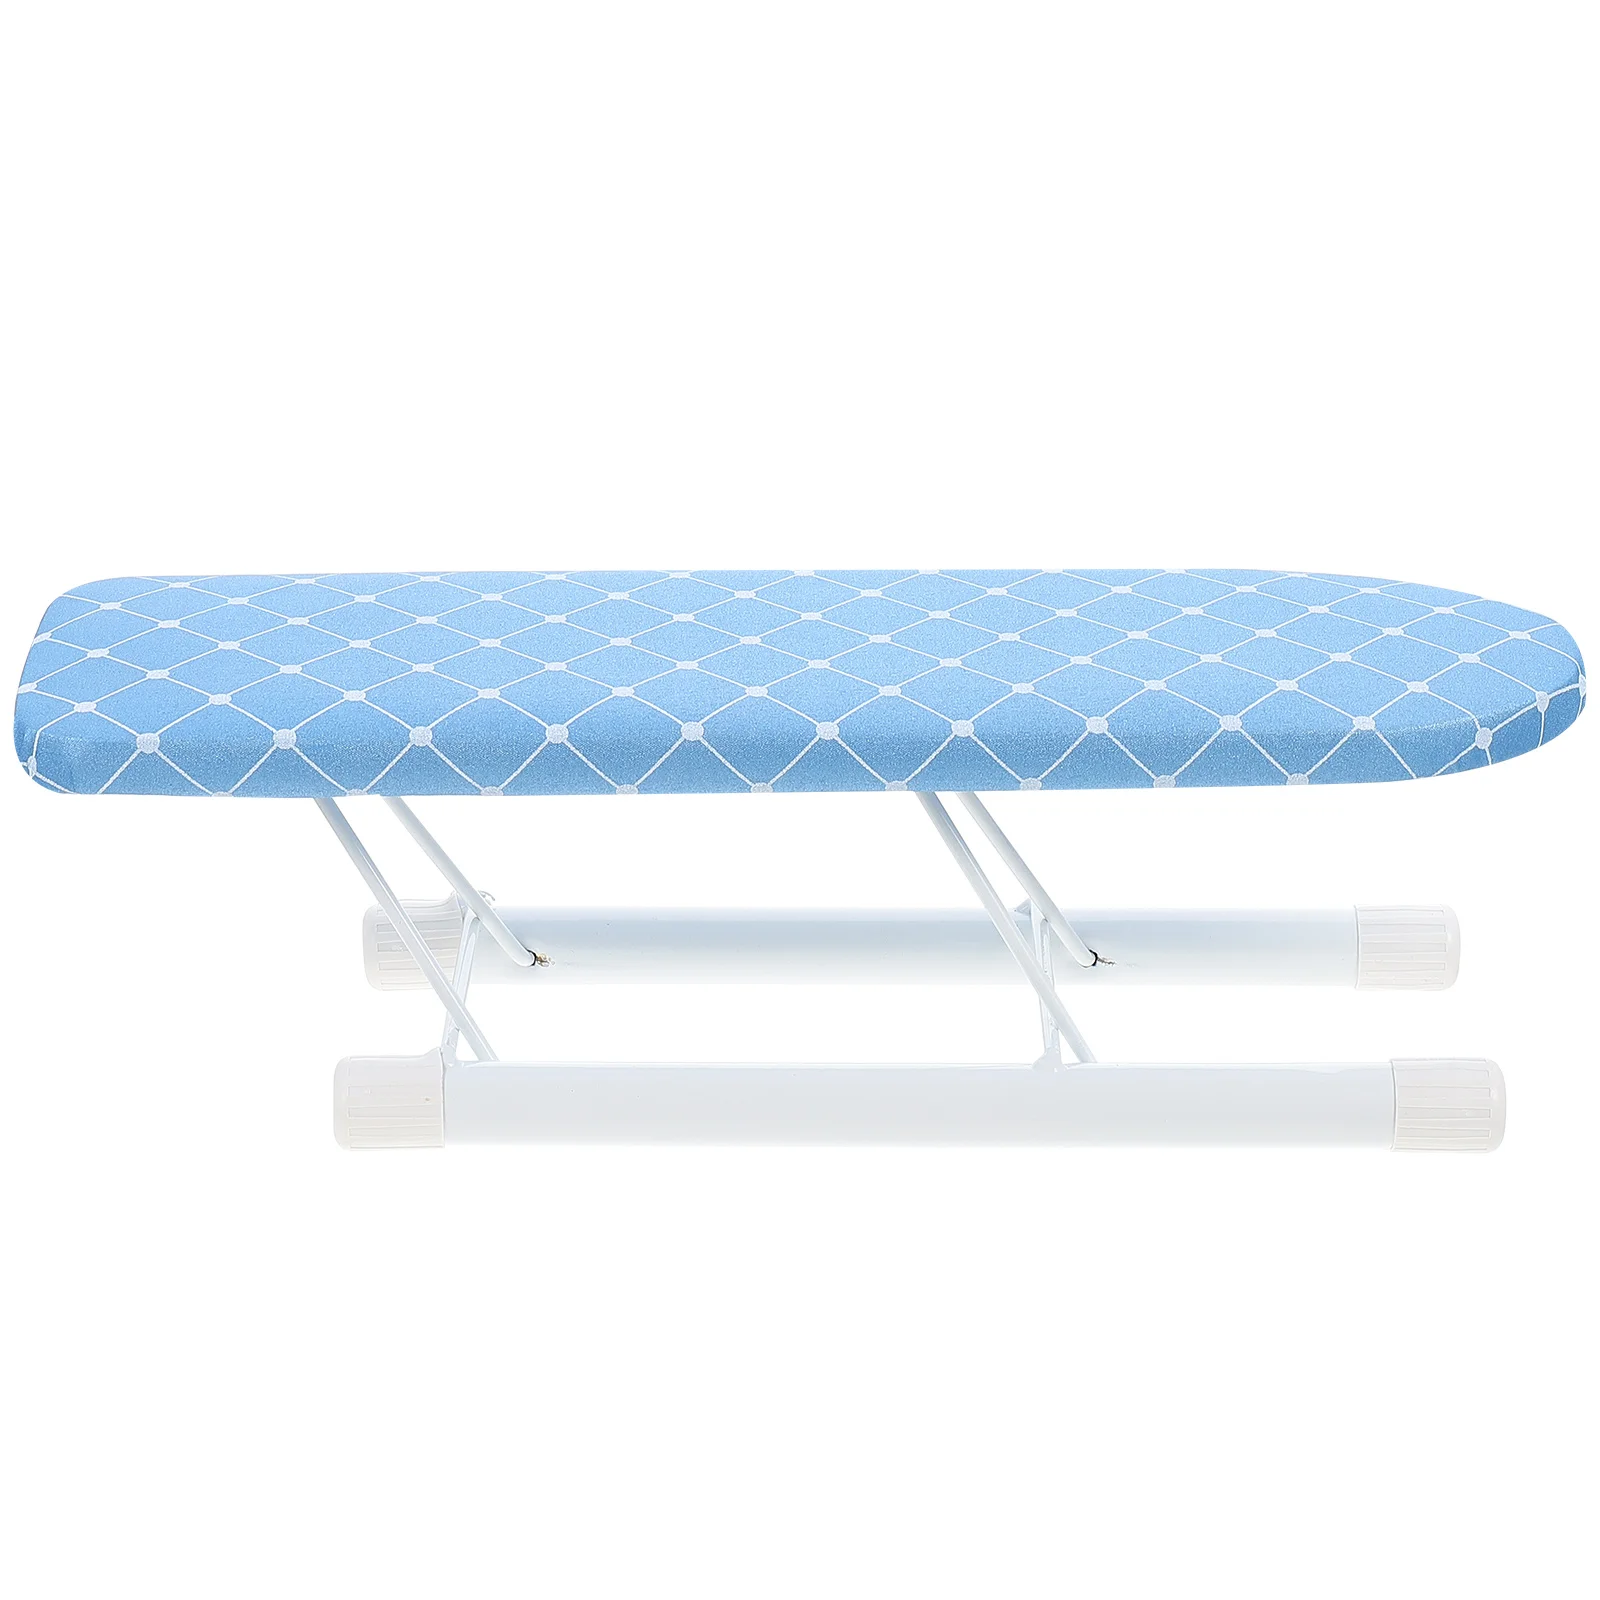 

Ironing Board Iron Tabletop Small Mini Table Portable Foldingfoldable Boards Clothes Sleeve Clothingquilters Bench Shelf Covers